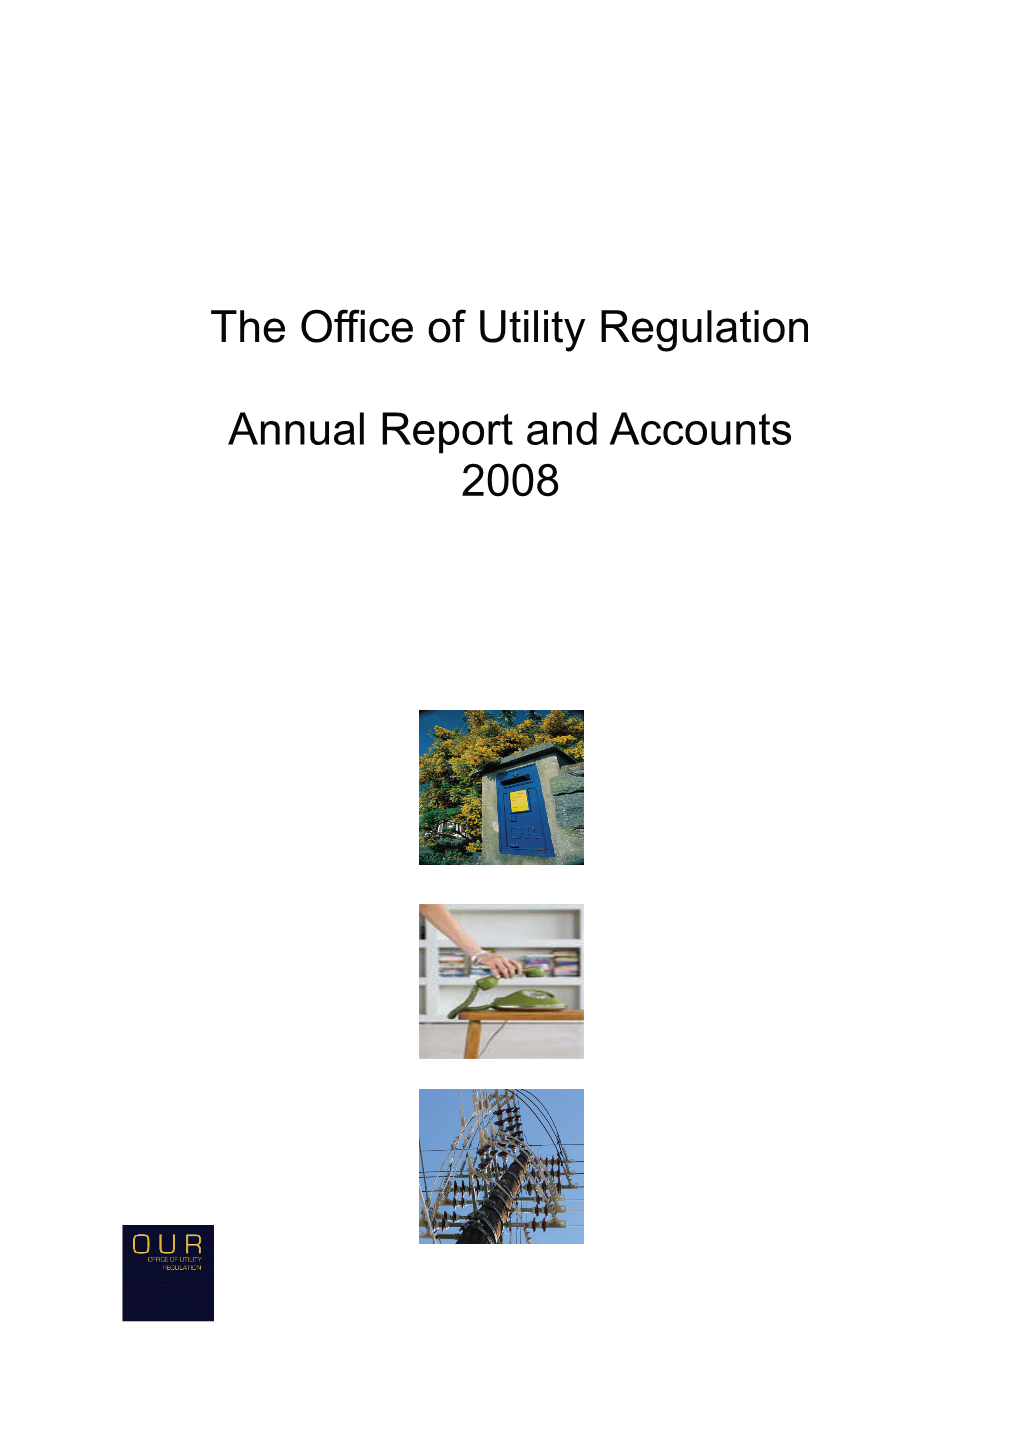 The Office of Utility Regulation Annual Report and Accounts 2008